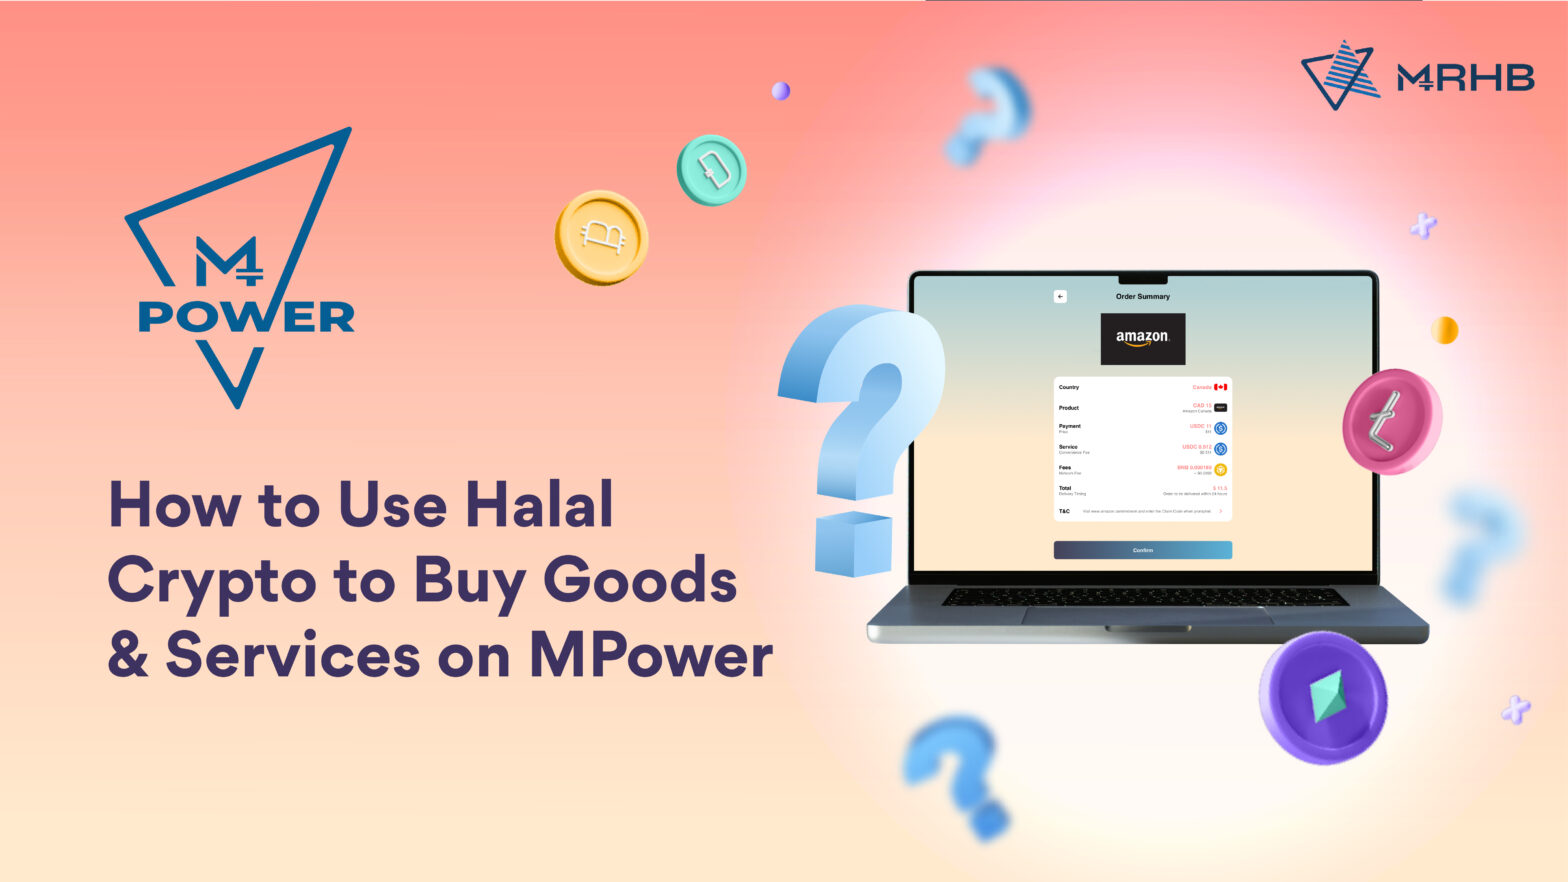 how to use halal crypto to buy goods & services on mpower